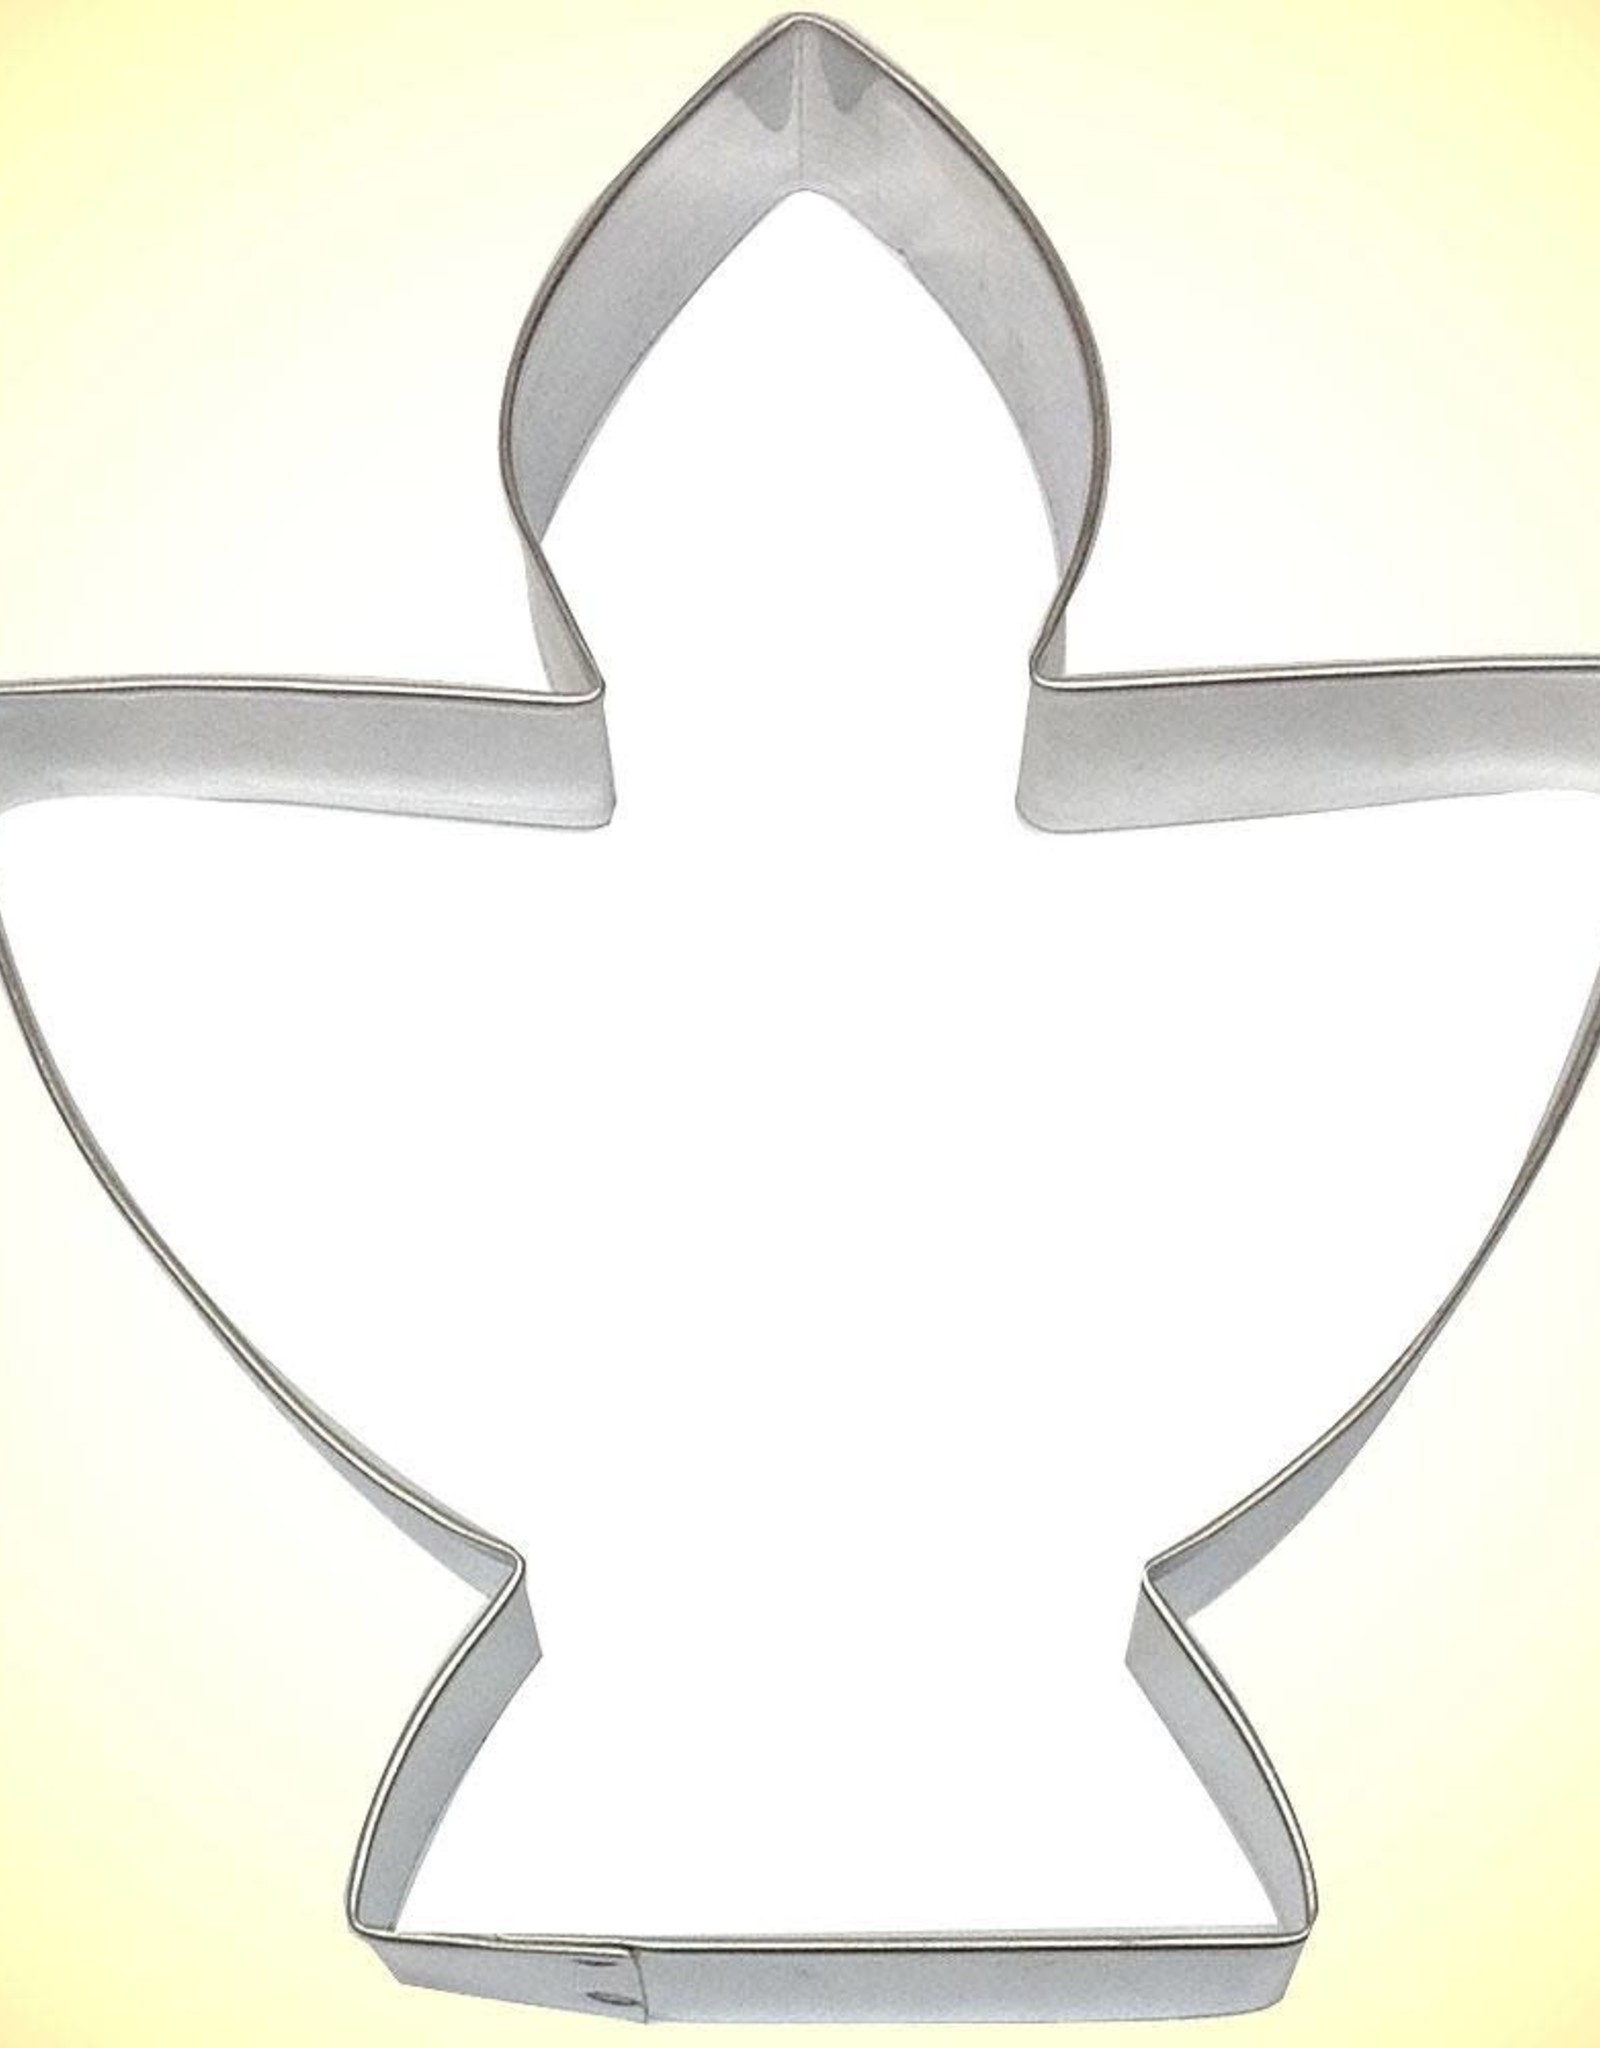 Chalice Cookie Cutter